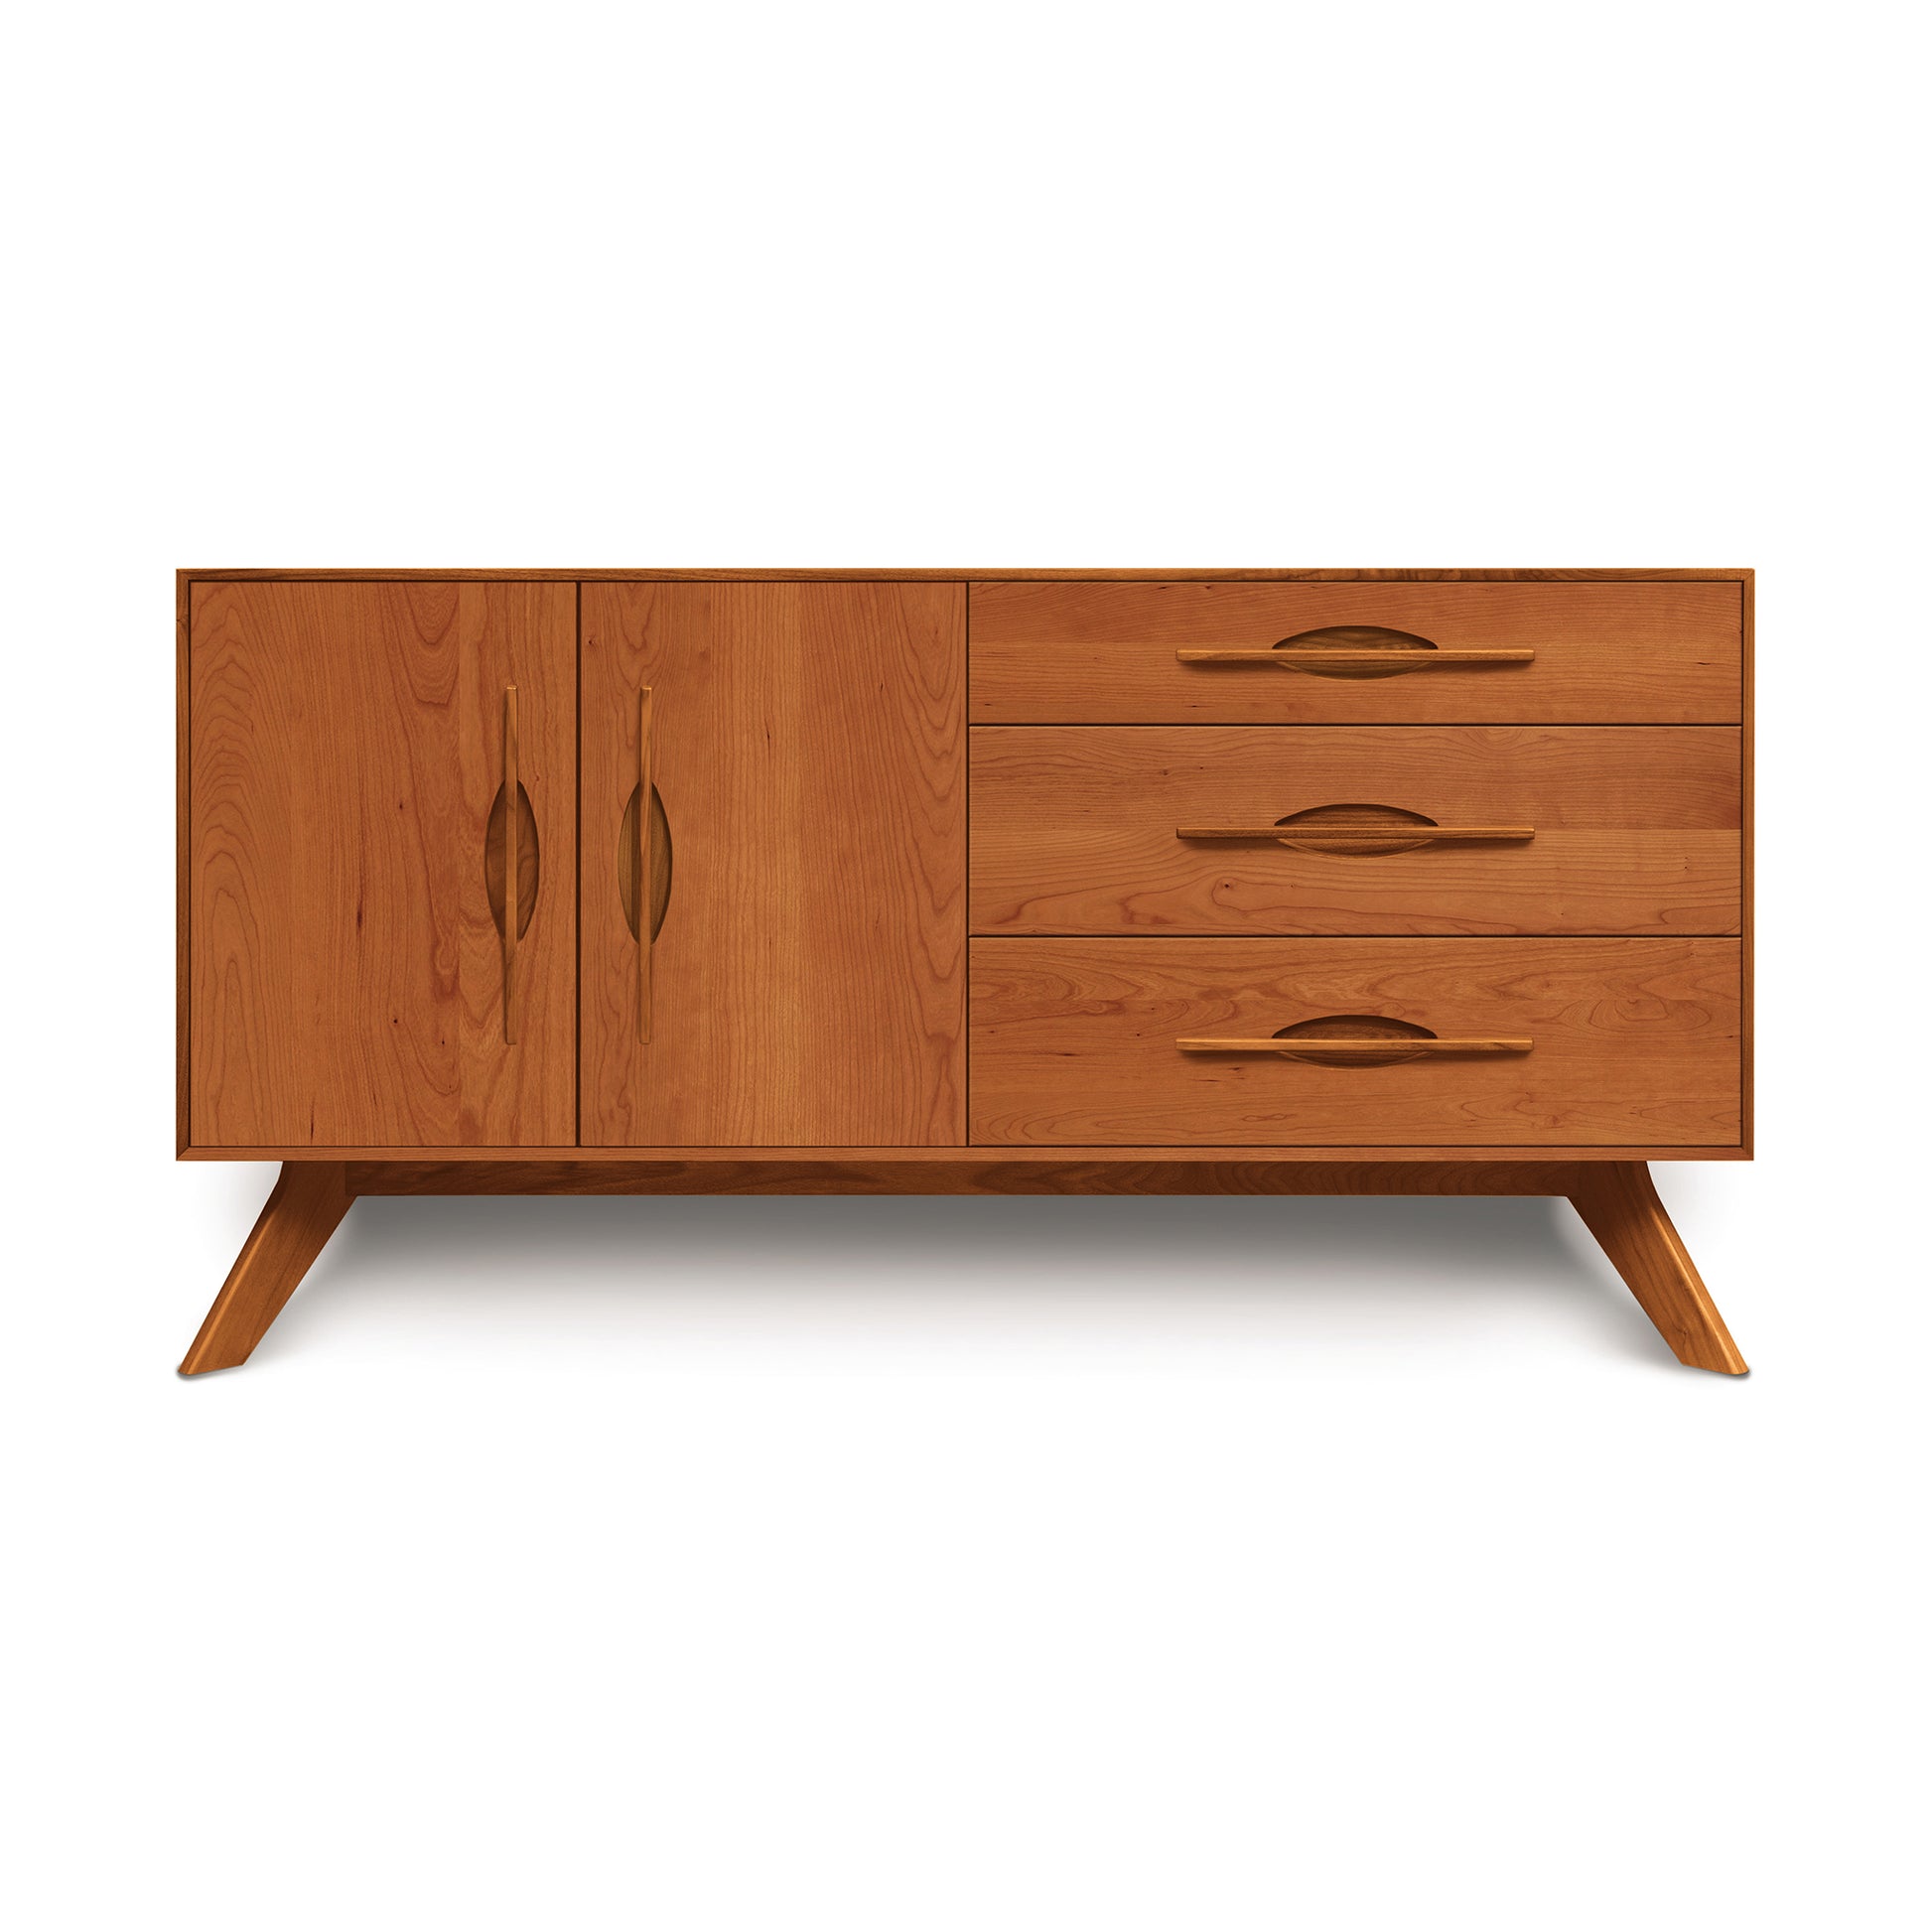 A Copeland Furniture handmade mid-century modern style Audrey 2-Door 3-Drawer Buffet with sliding doors and tapered legs.